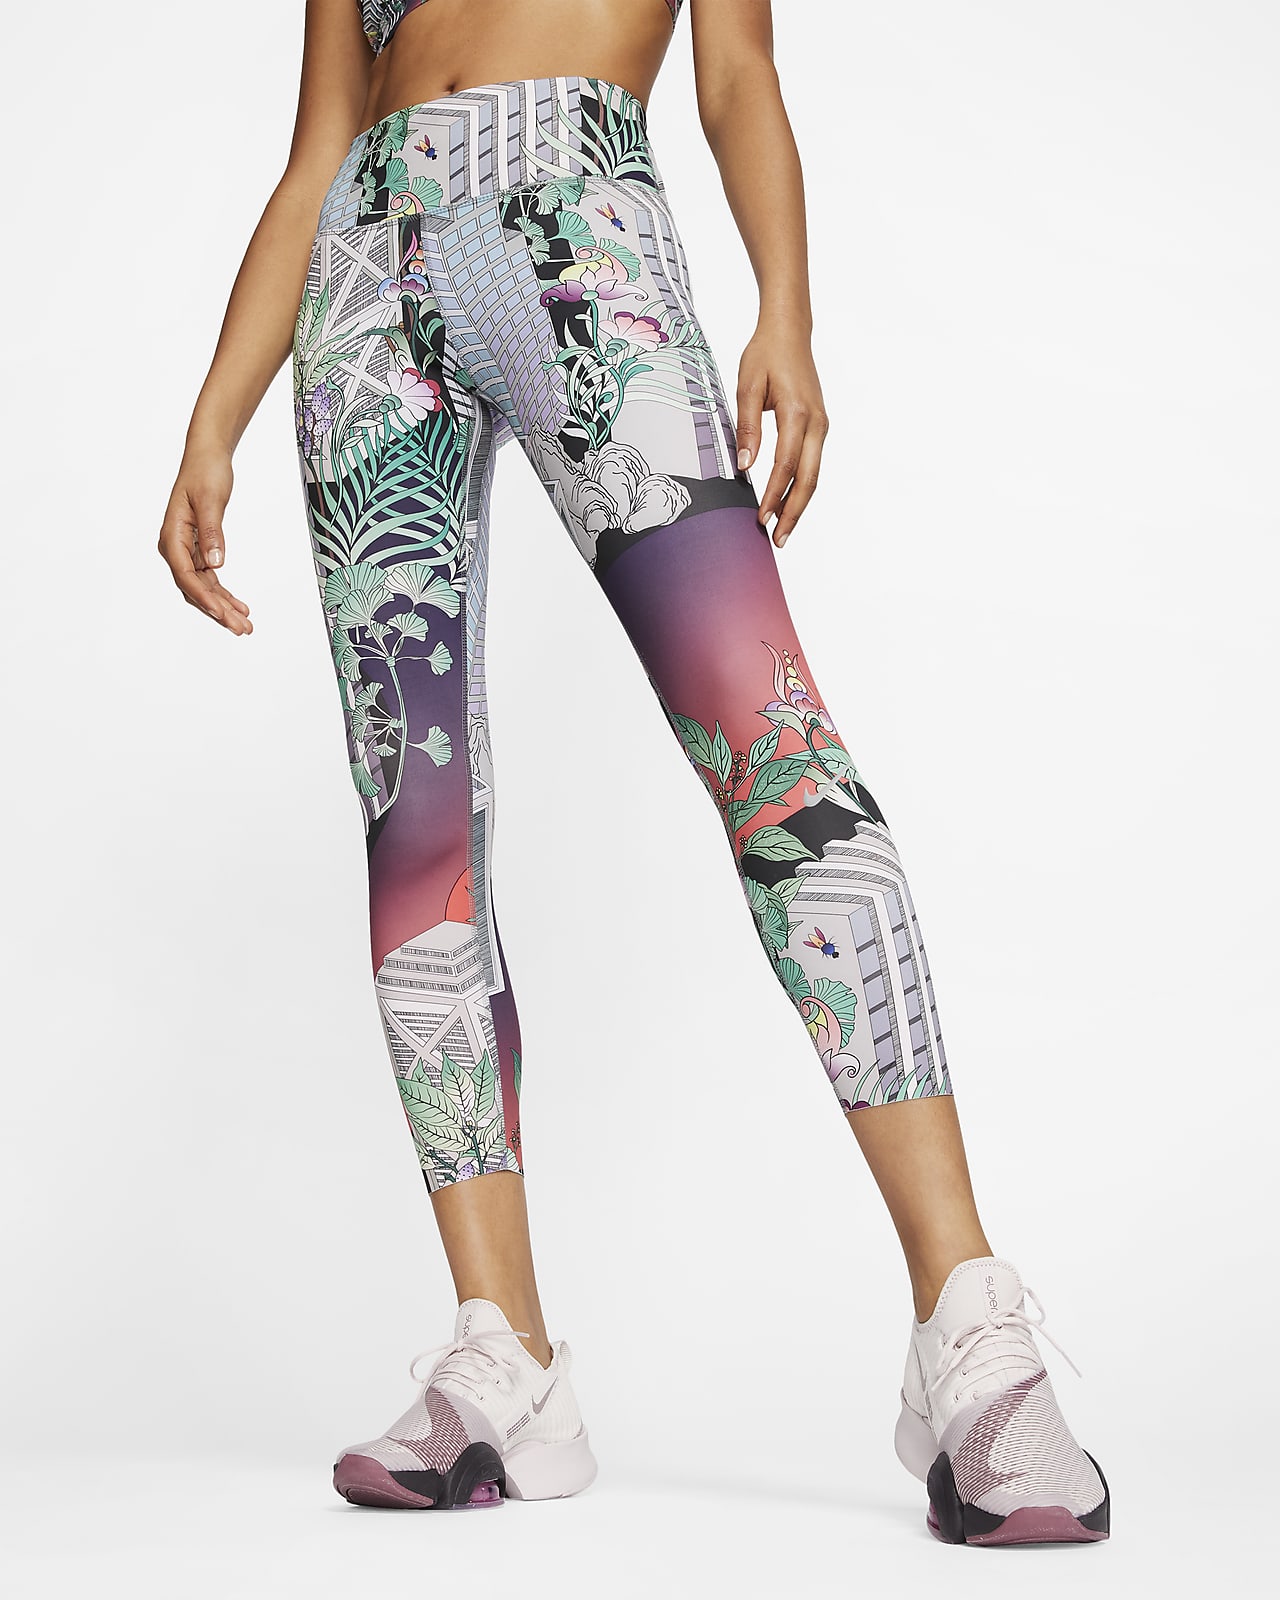 women's nike epic lux running tights